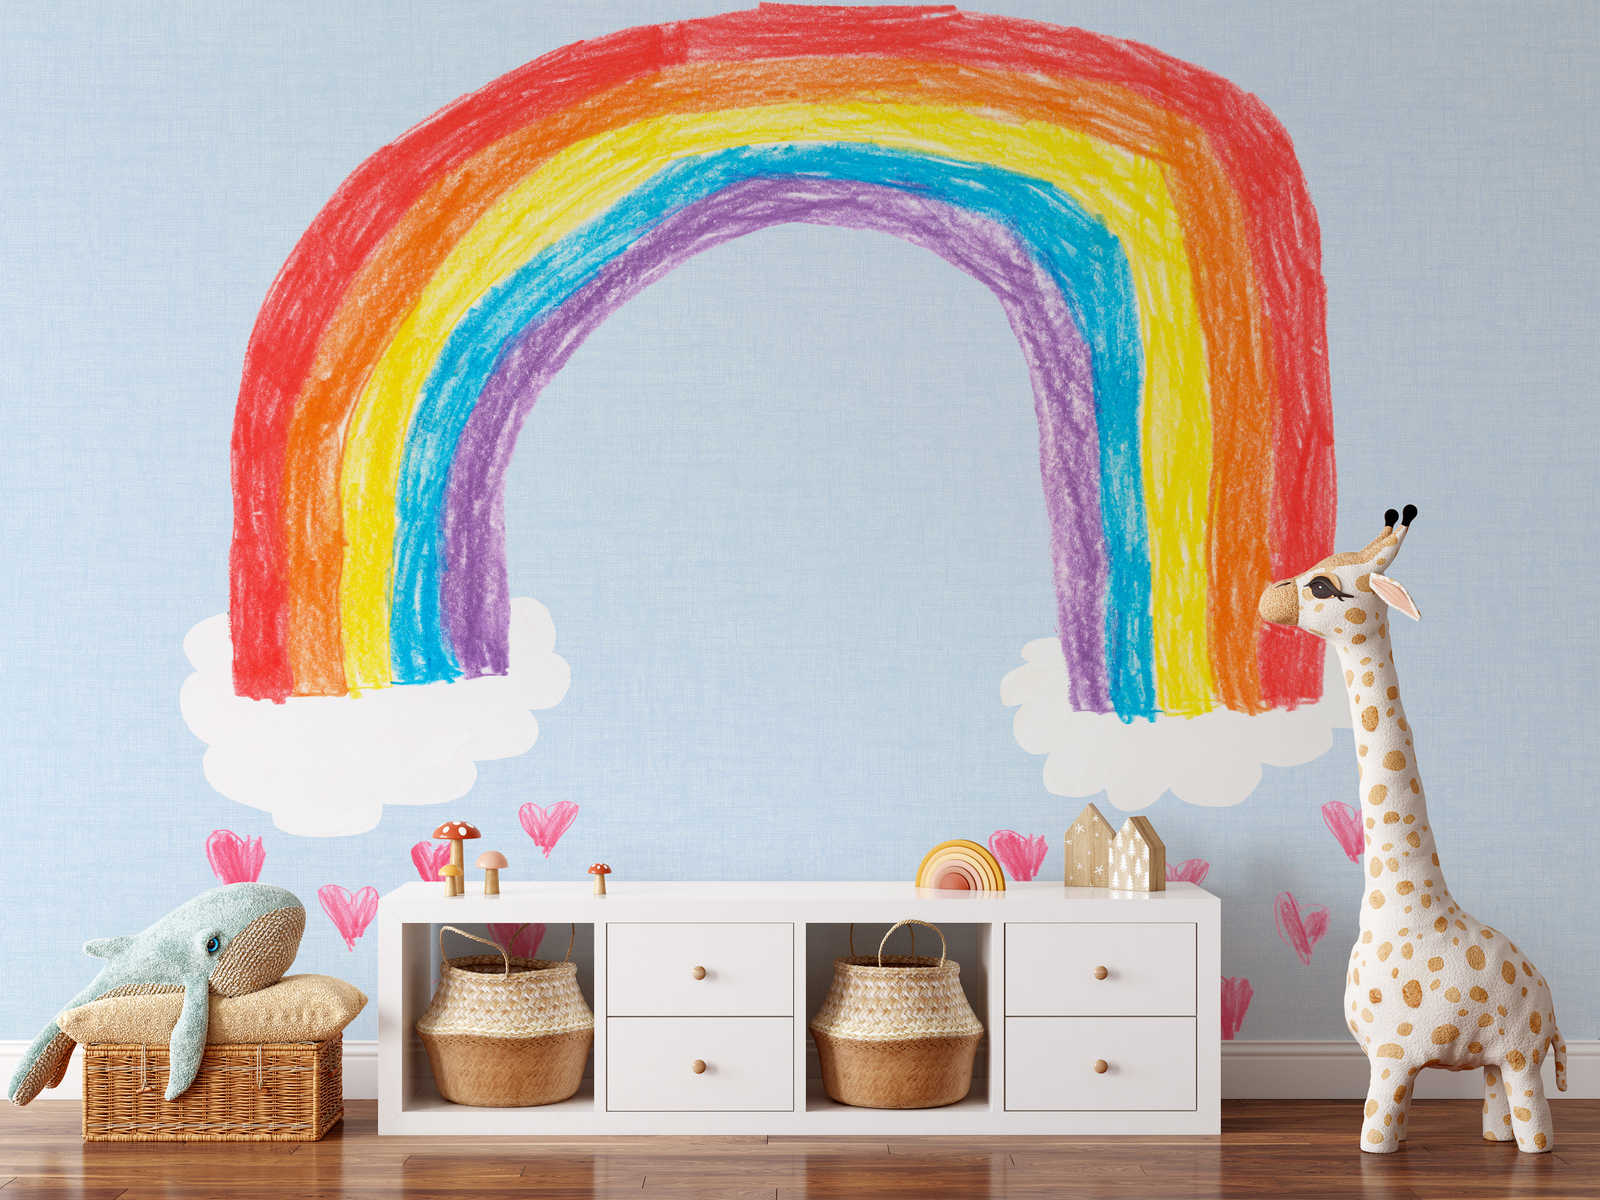             Photo wallpaper self painted rainbow for children room
        